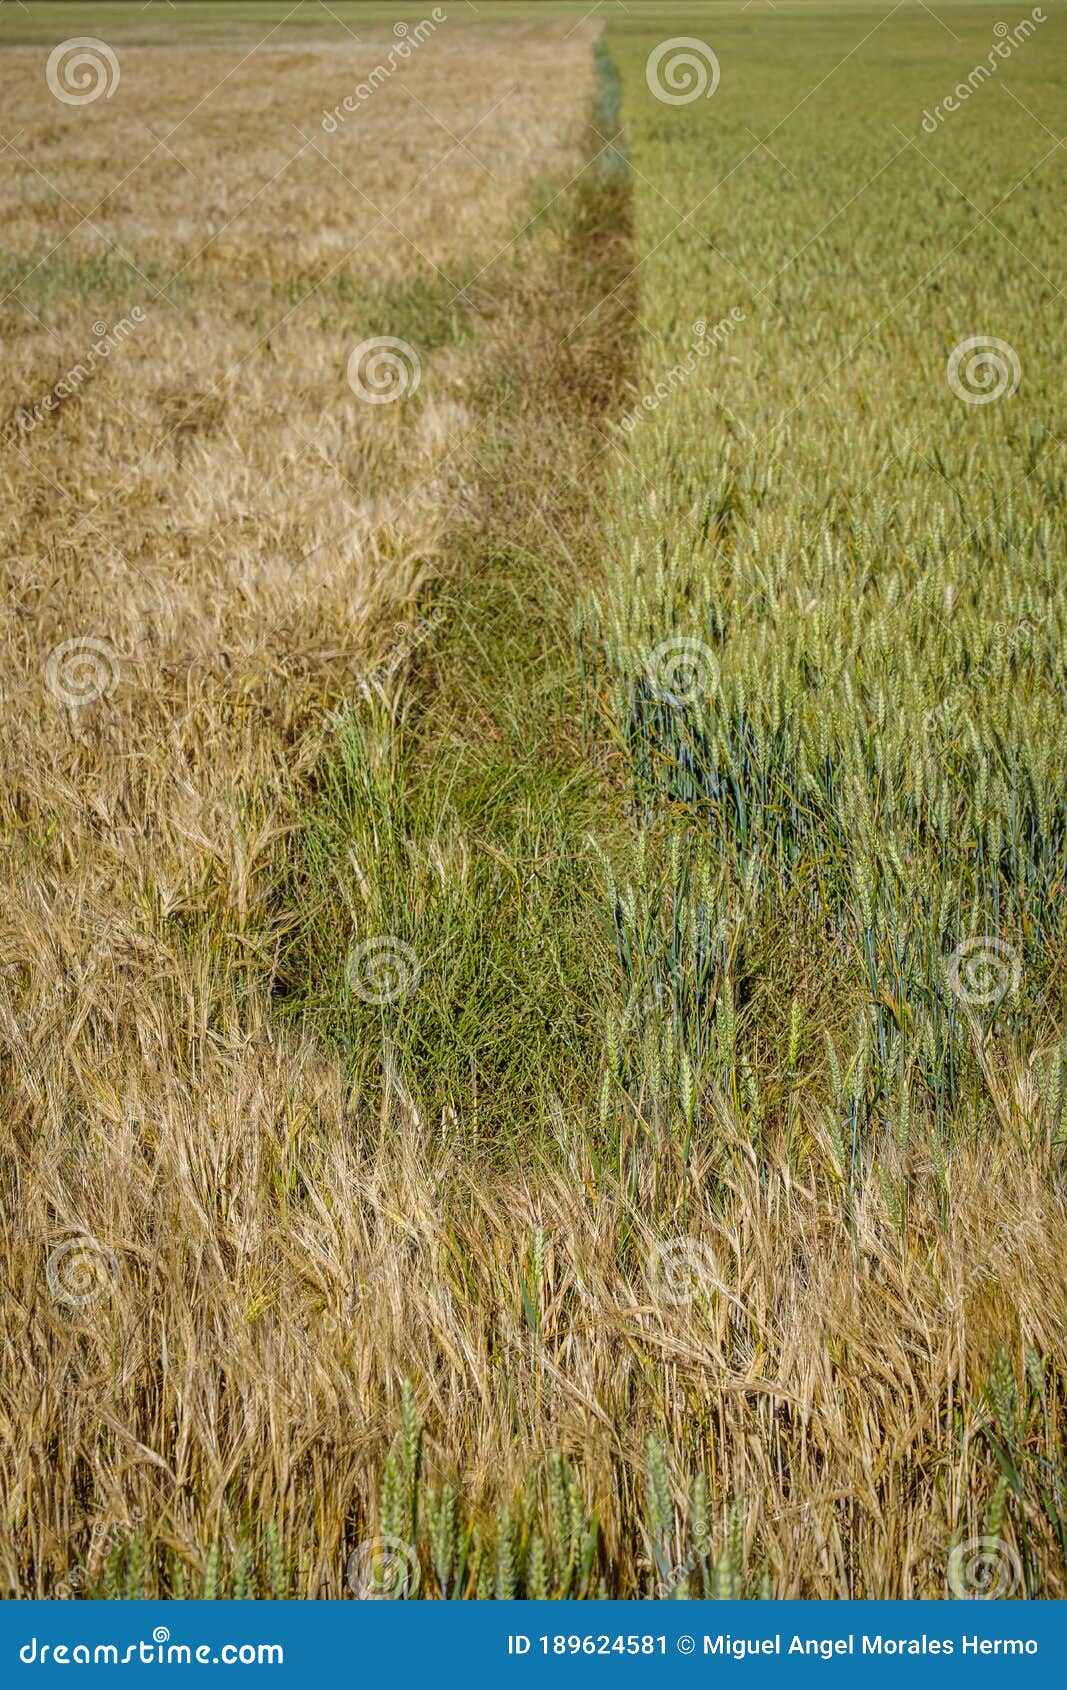 cultivated fields in the interior spain